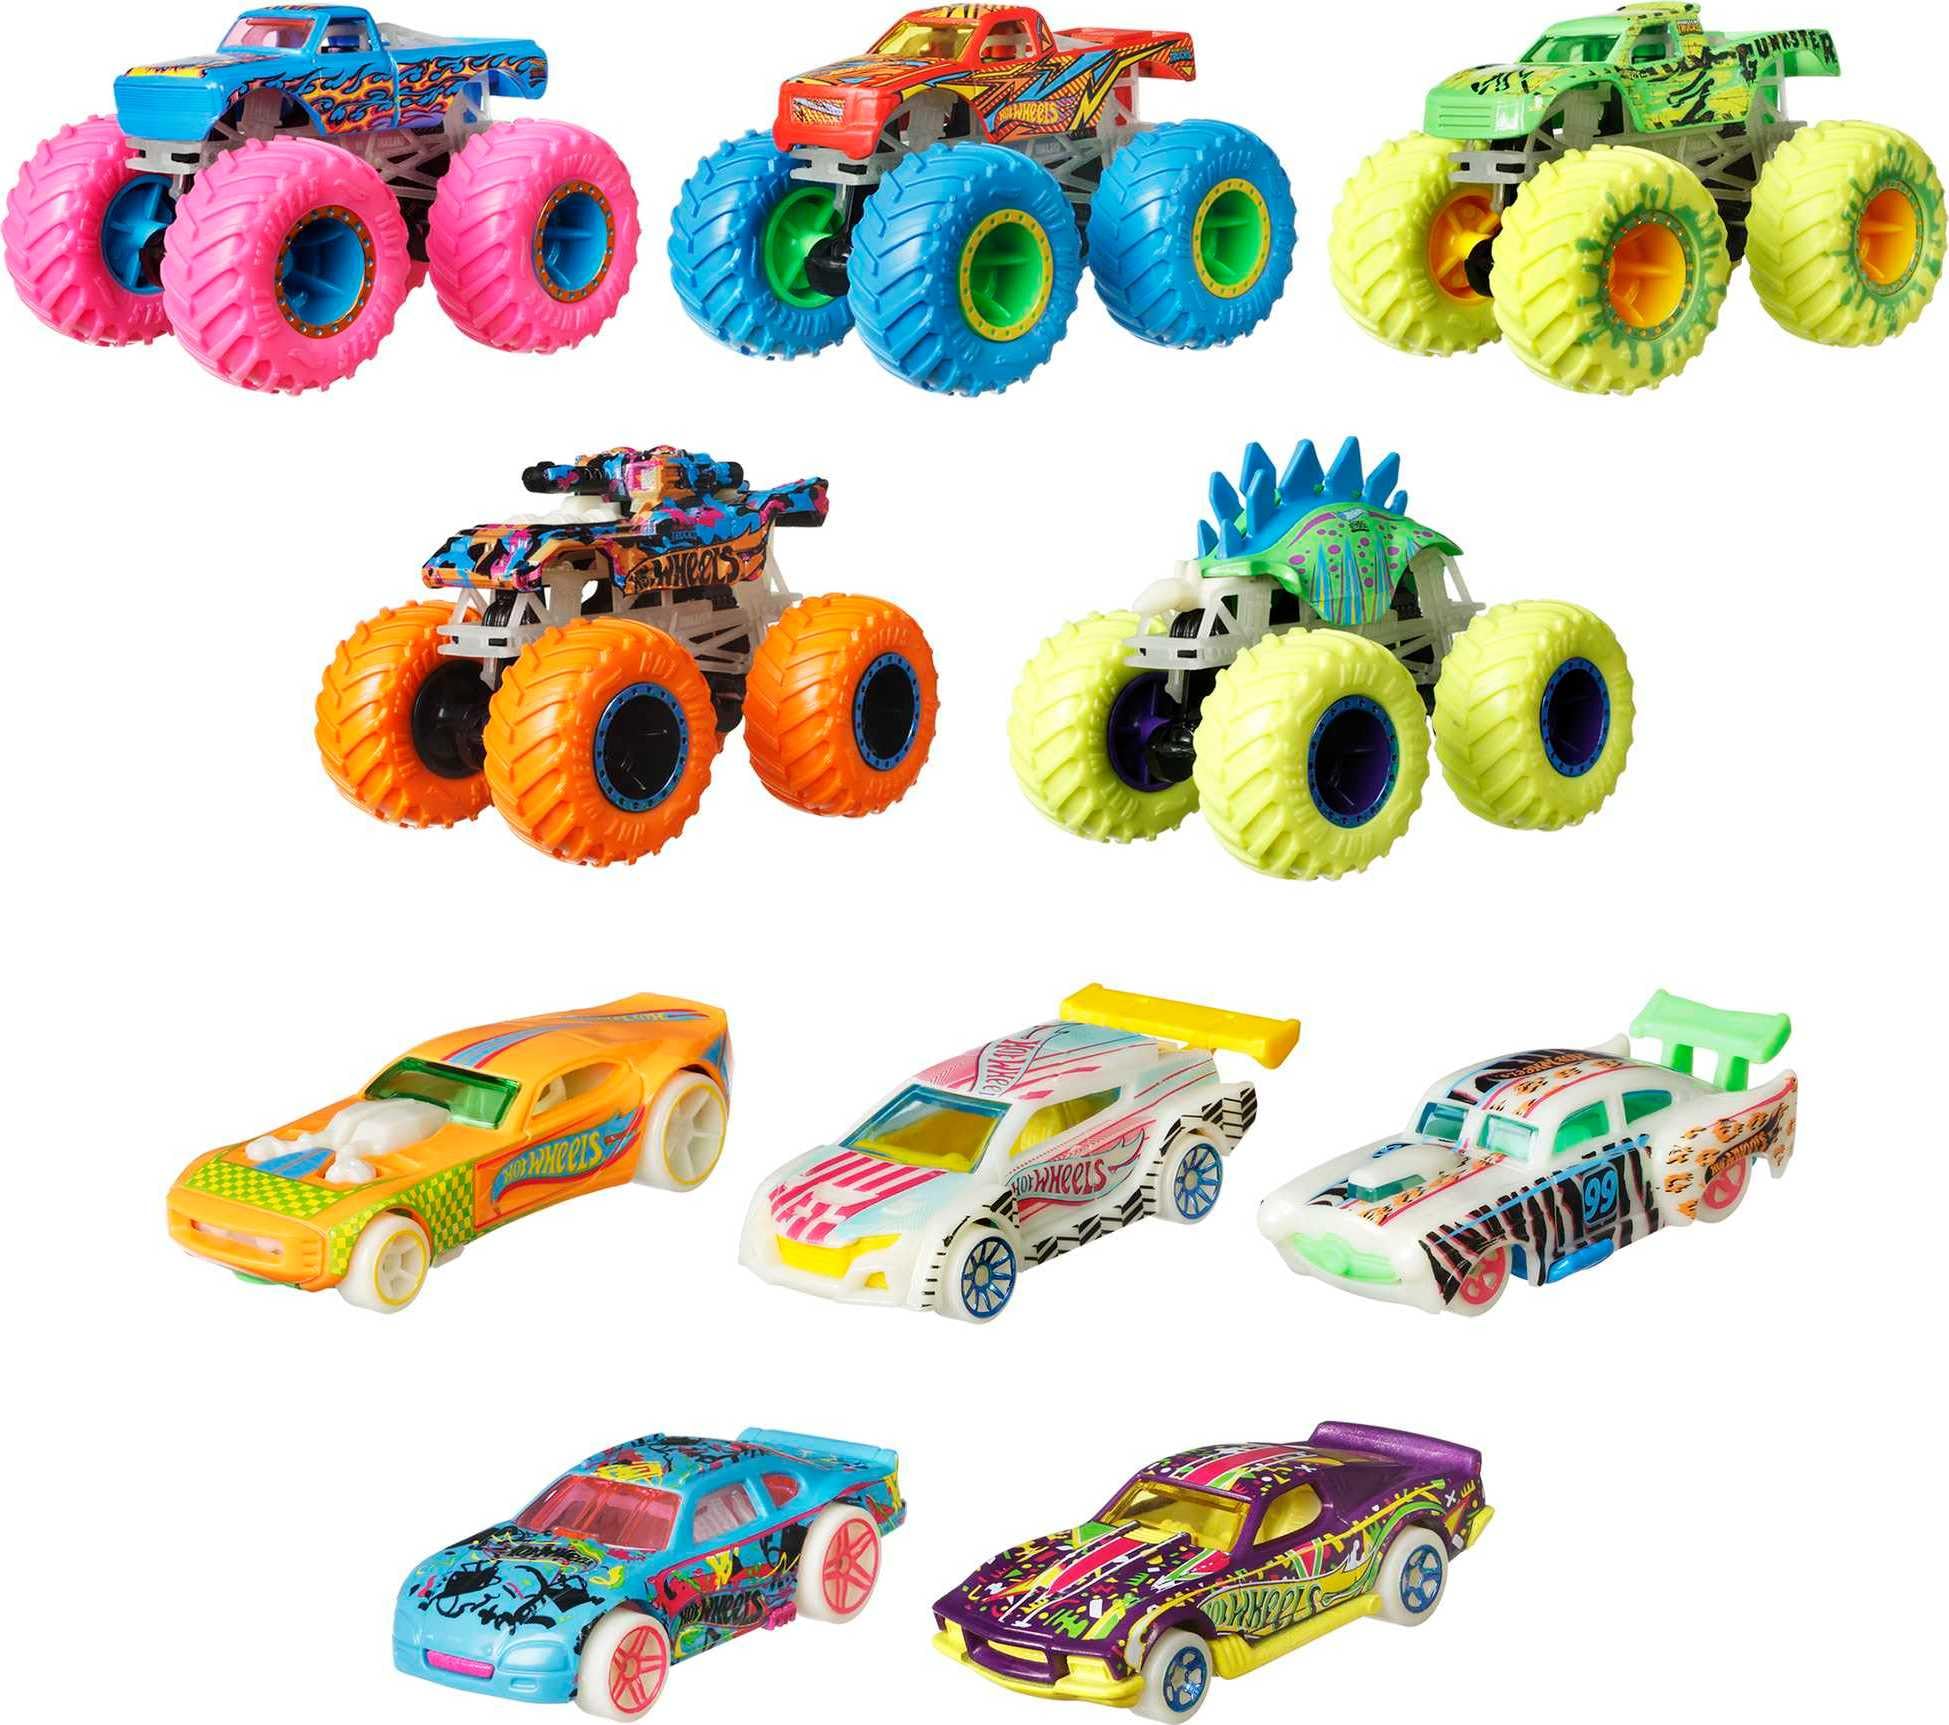 Hot Wheels Monster Trucks Glow in the Dark Multipack with 10 Toy Vehicles: 5 Monster Trucks & 5 1:64 Scale Cars, Collectible Toy